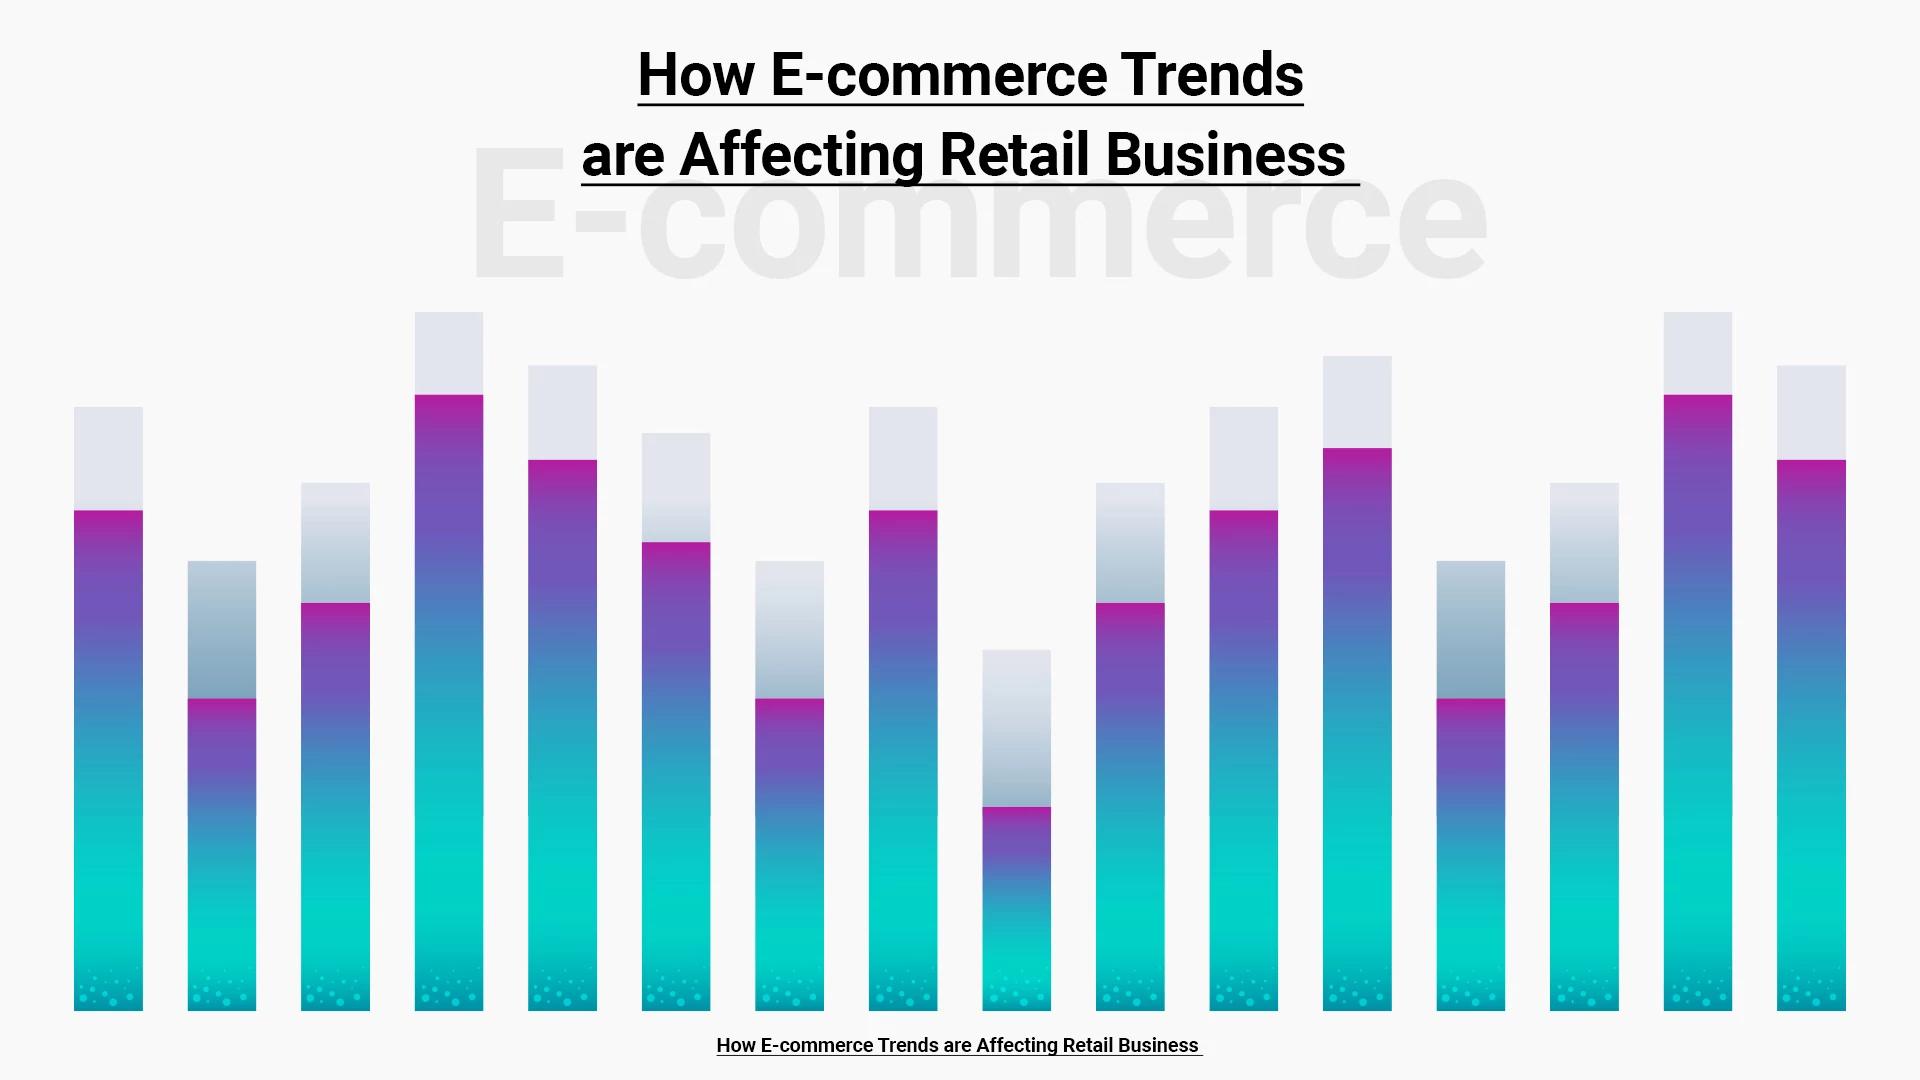 How E-commerce Trends are Affecting Retail Business